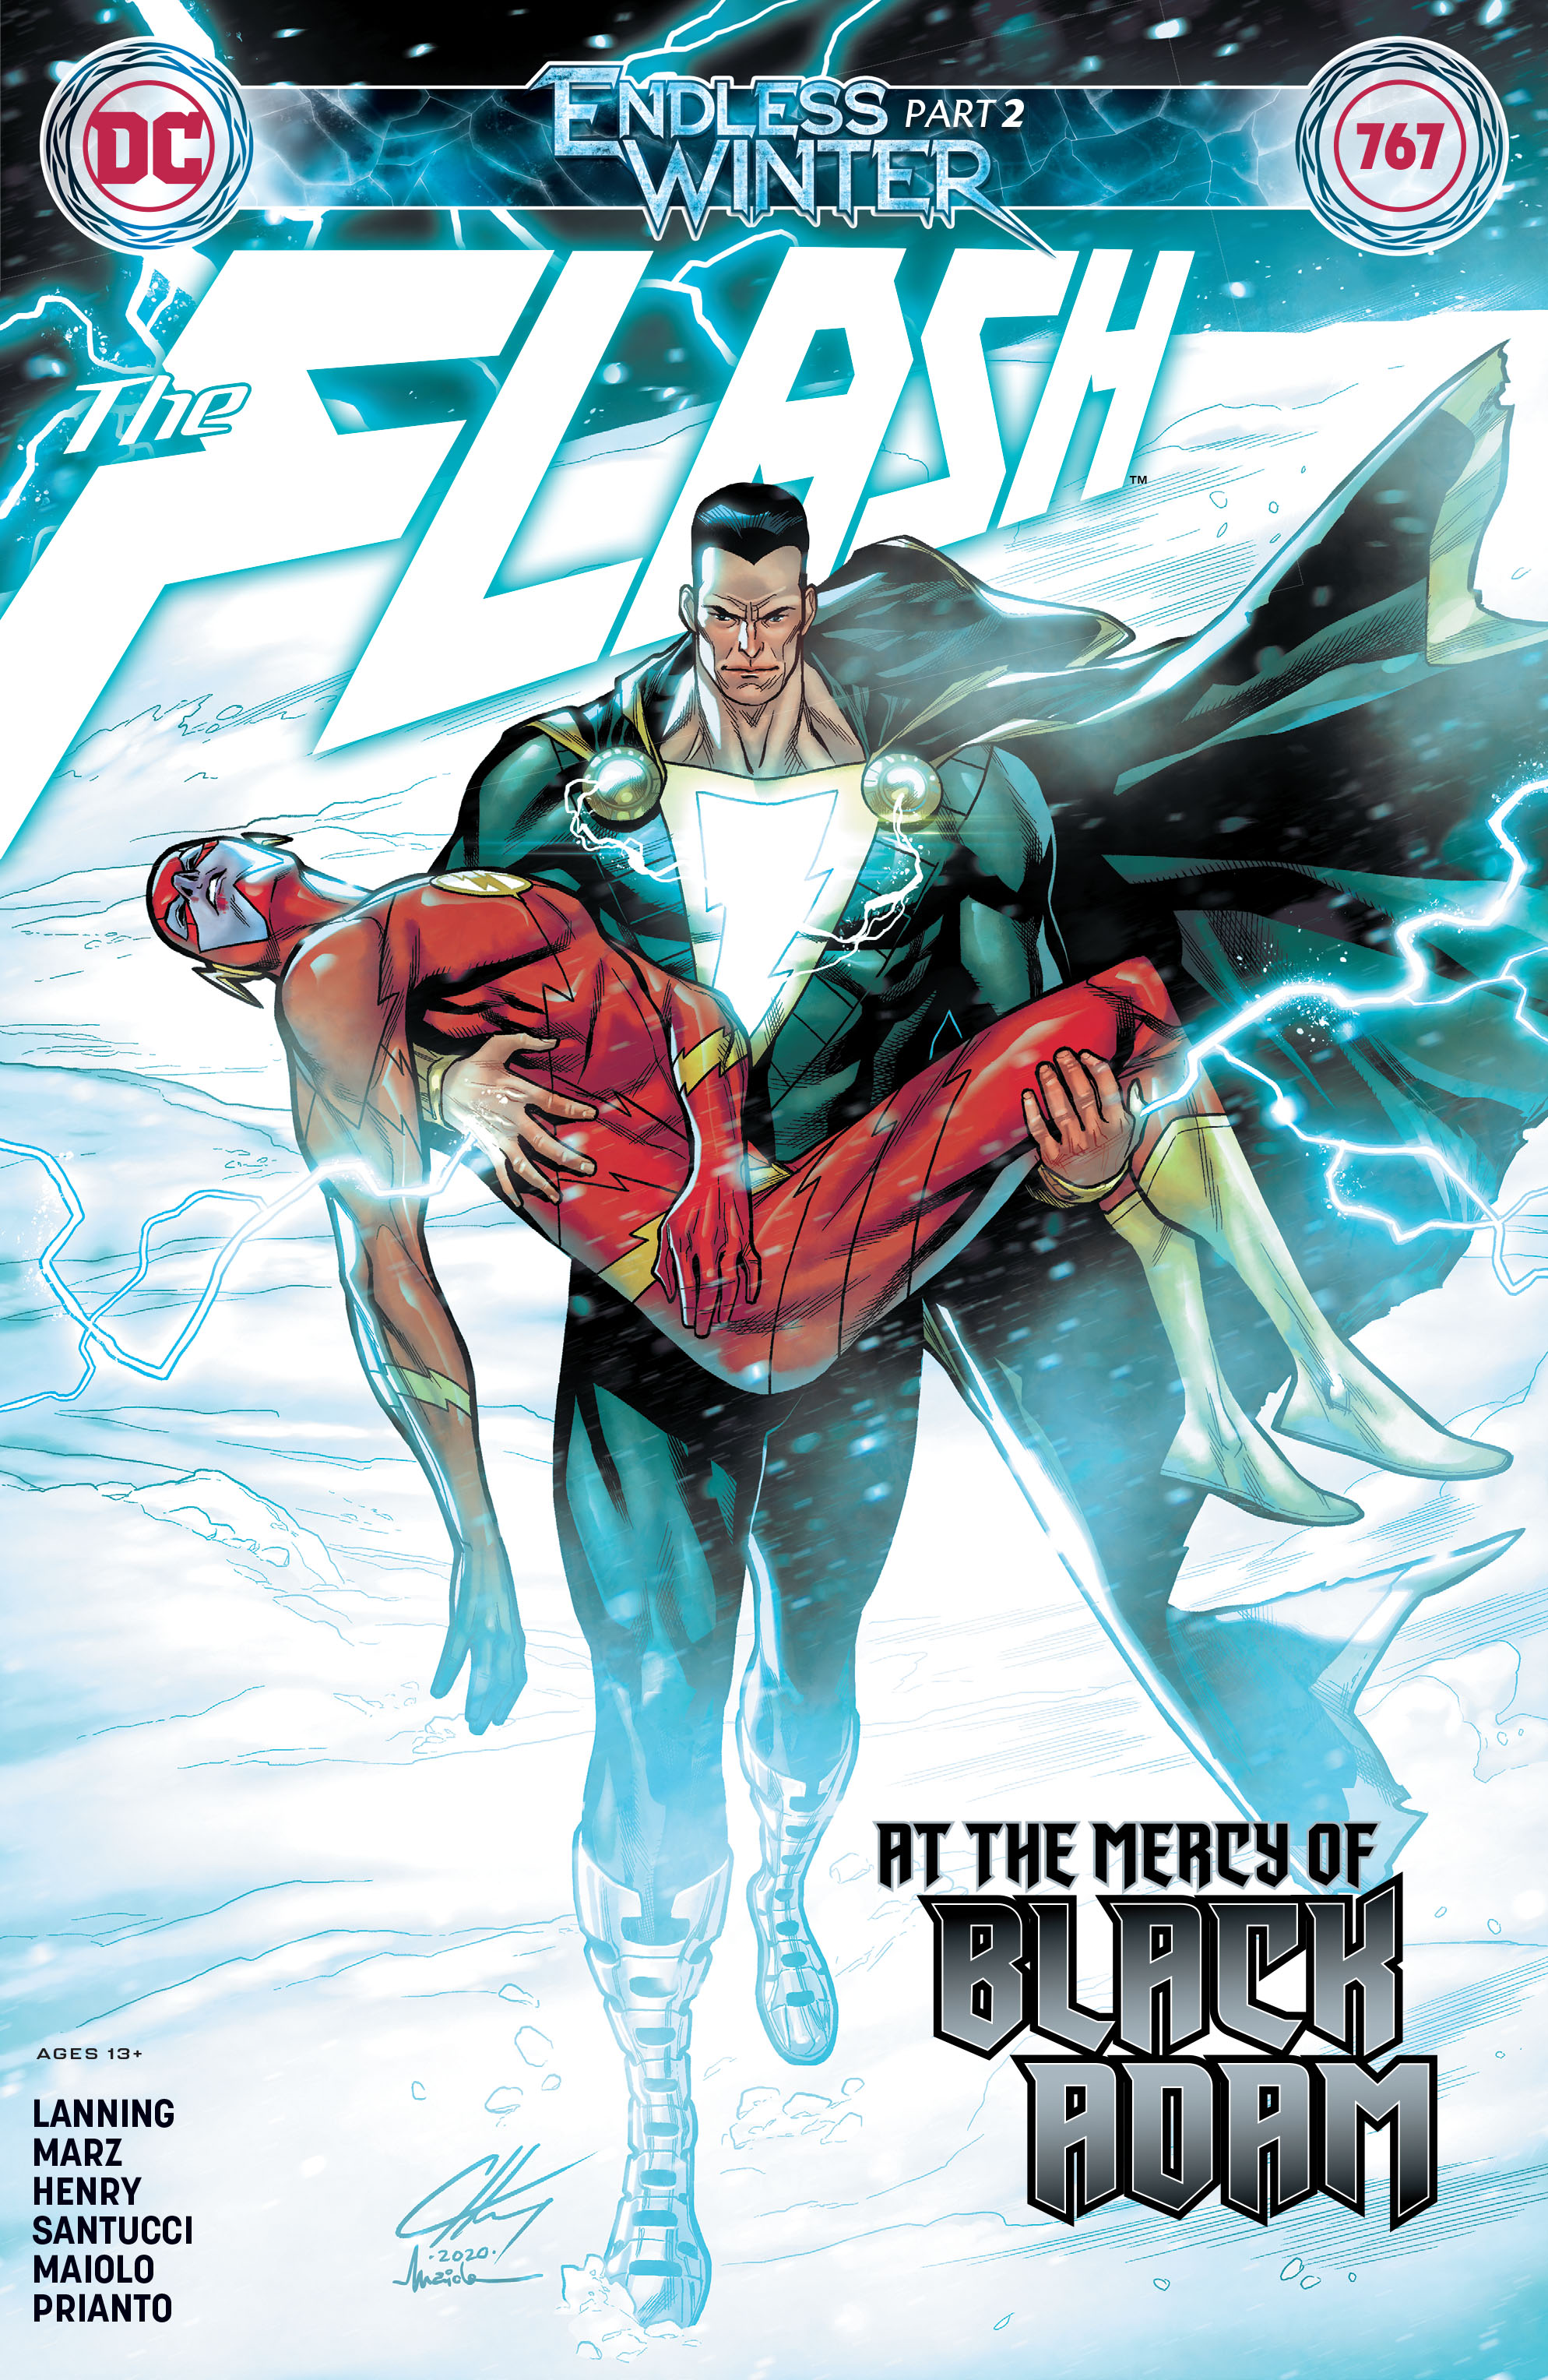 Read online The Flash (2016) comic -  Issue #767 - 1